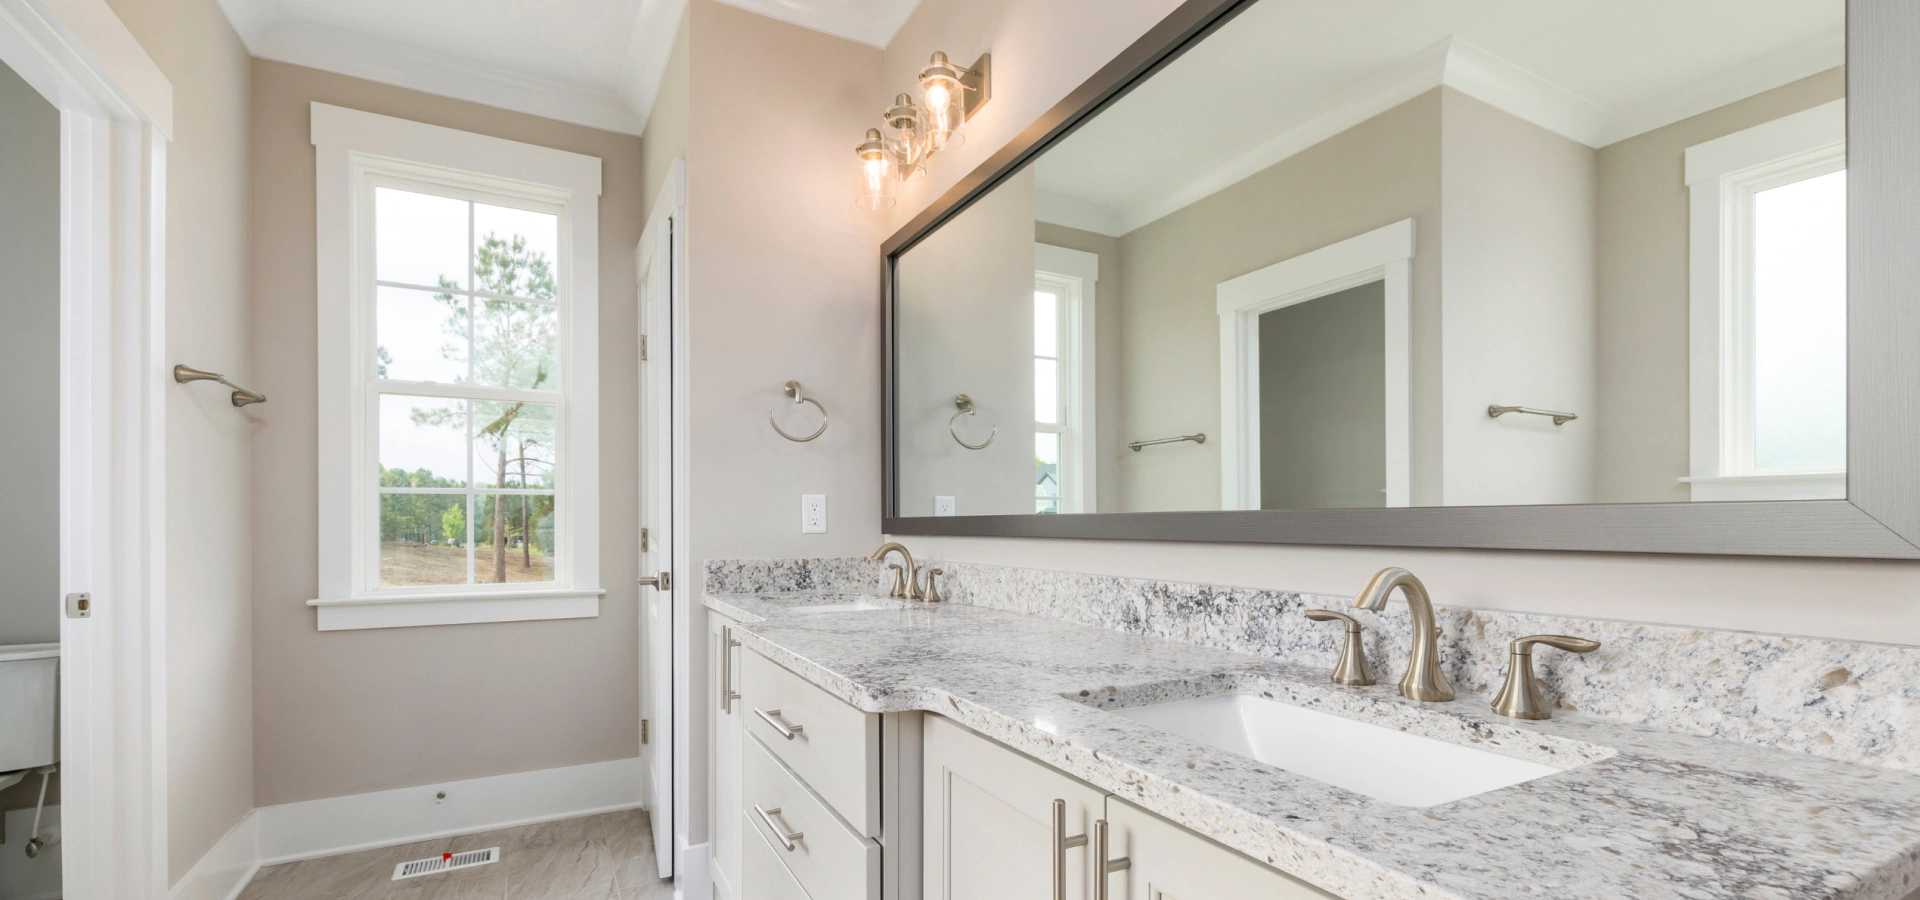 custom bathroom remodeling with wide mirror and lights over cabinets and countertop